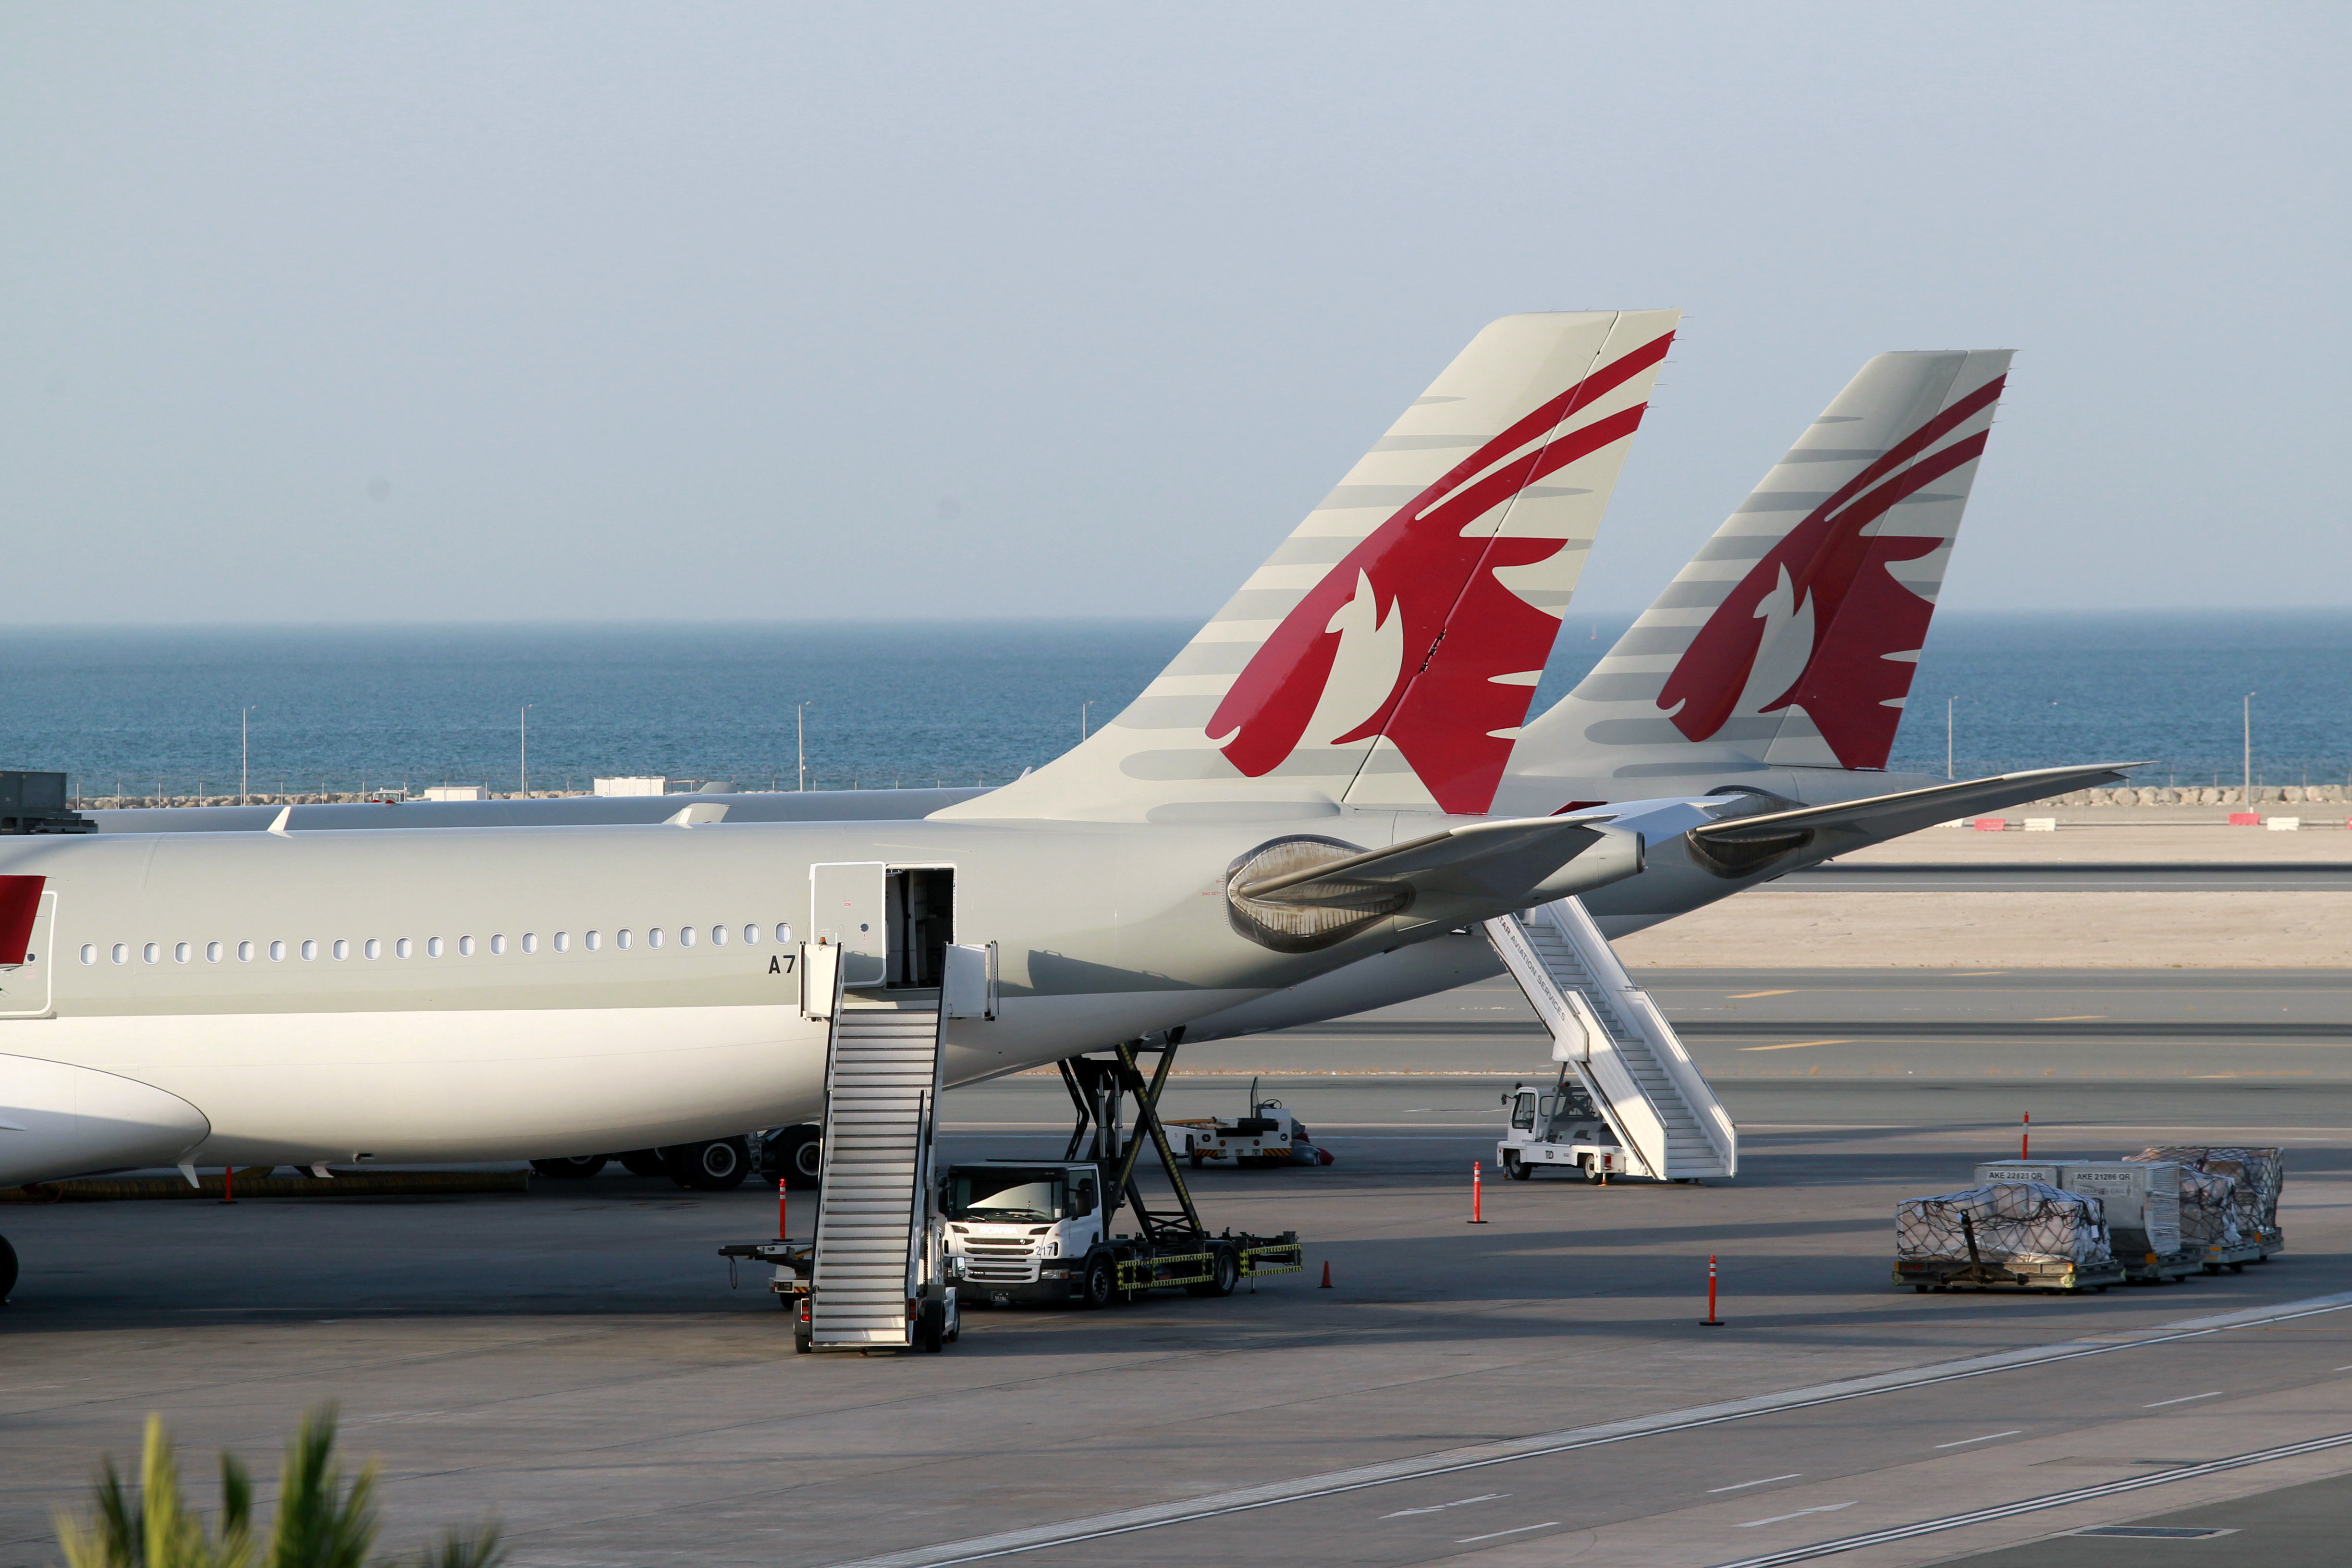 Qatar Airways aircrafts are seen at Hamad International Airport in Doha